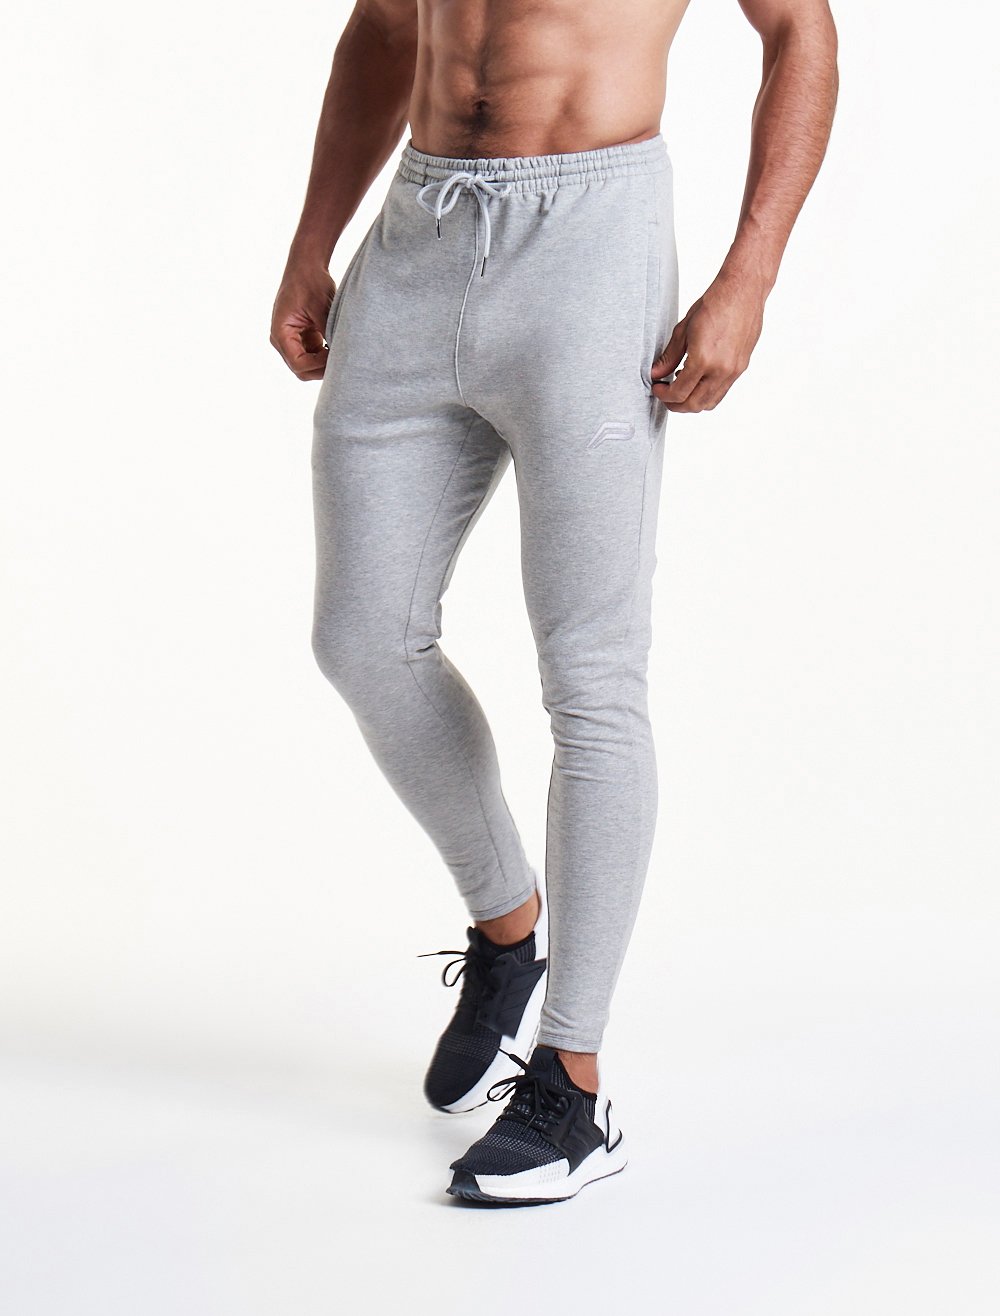 Pro-Fit Tapered Bottoms / Triple Grey Pursue Fitness 1